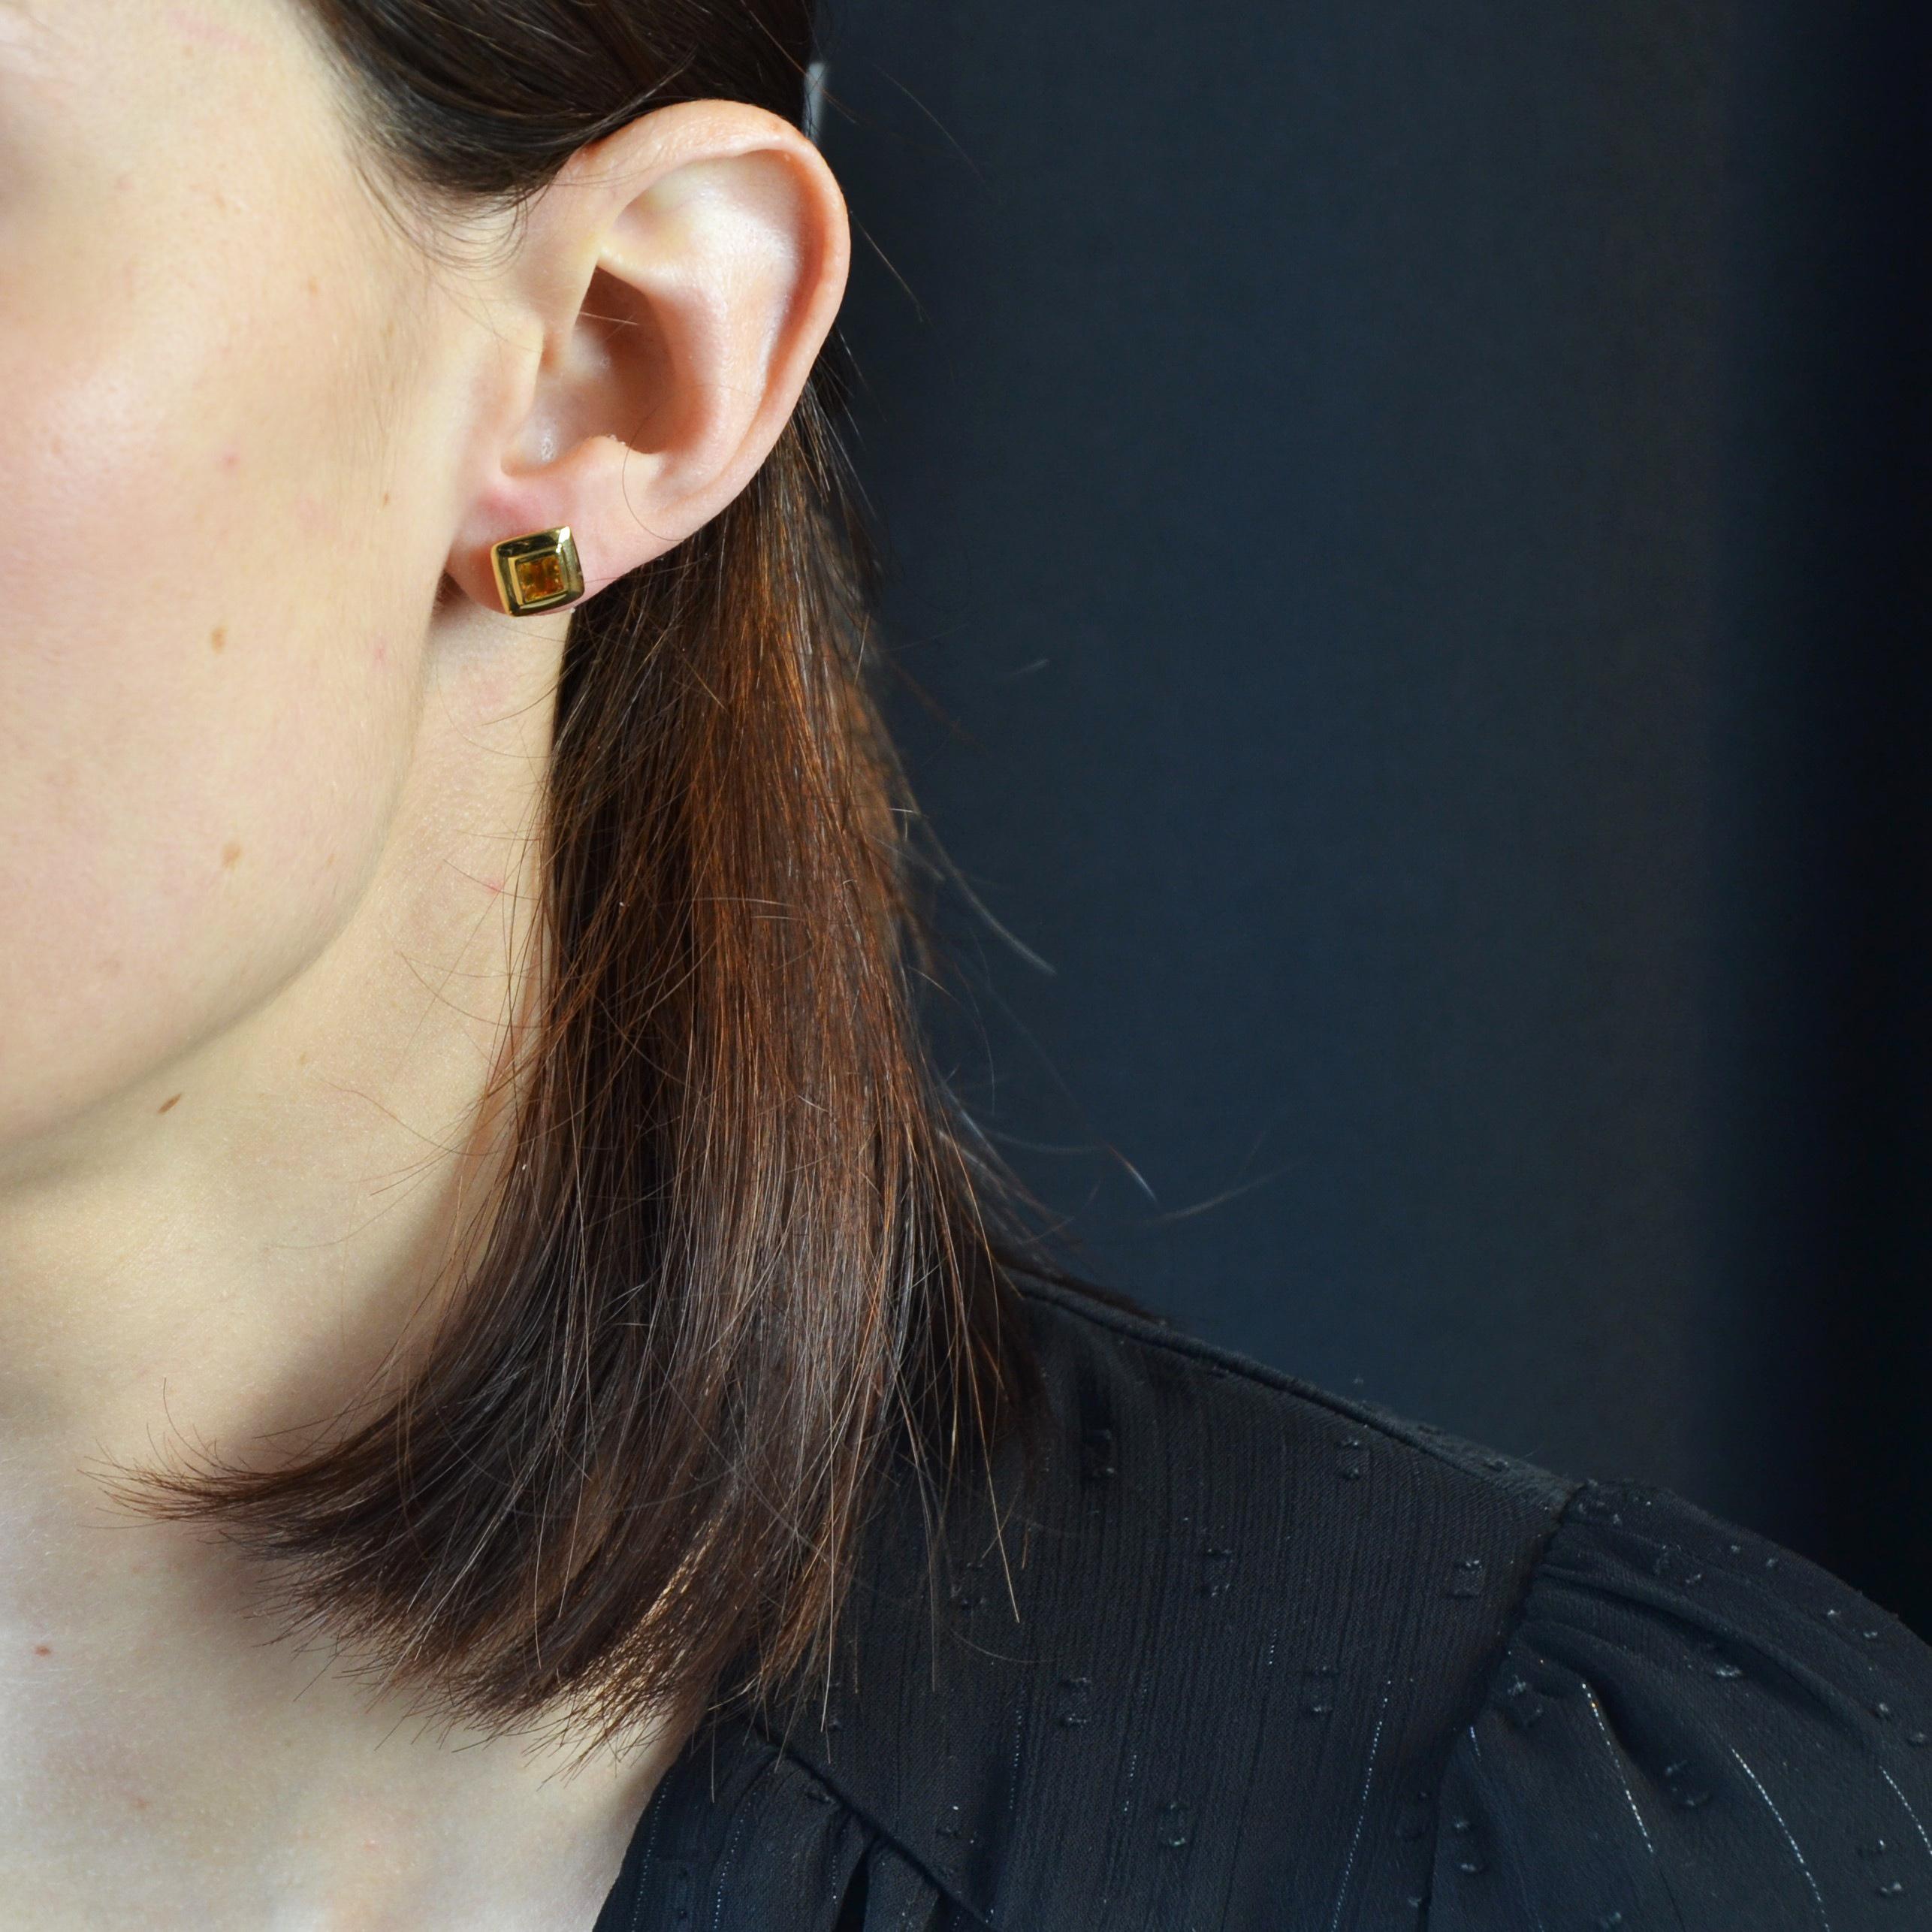 For pierced ears.
Earrings in 18 karat yellow gold, eagle head hallmark.
Second- hand earrings in yellow gold, they are of square shape decorated with a square citrine in closed setting.
Height : 8,9 mm, thickness : 4,1 mm approximately.
Total